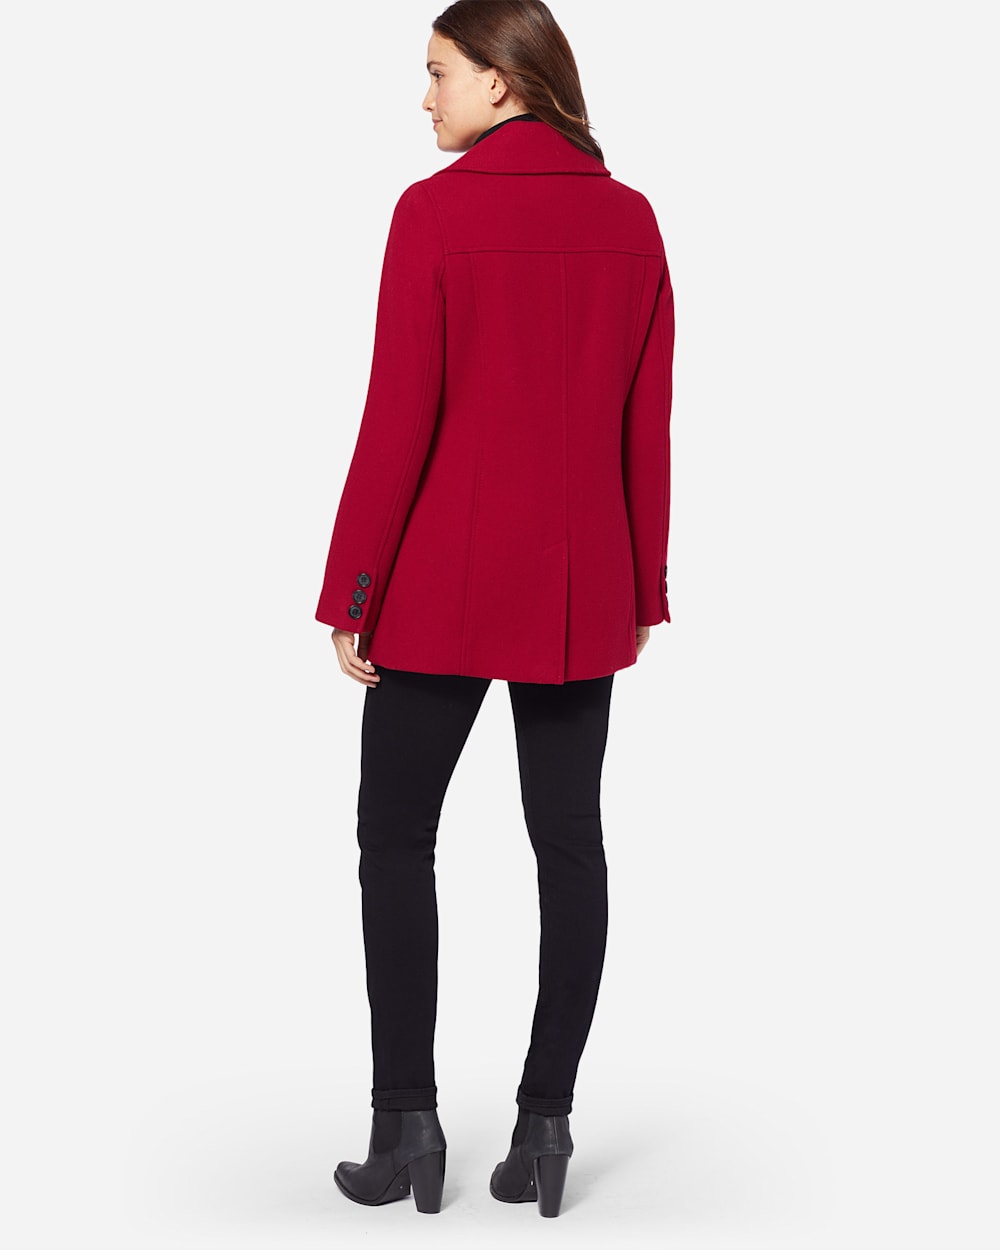 ADDITIONAL VIEW OF WOMEN'S WOOL PEA COAT IN RED image number 3